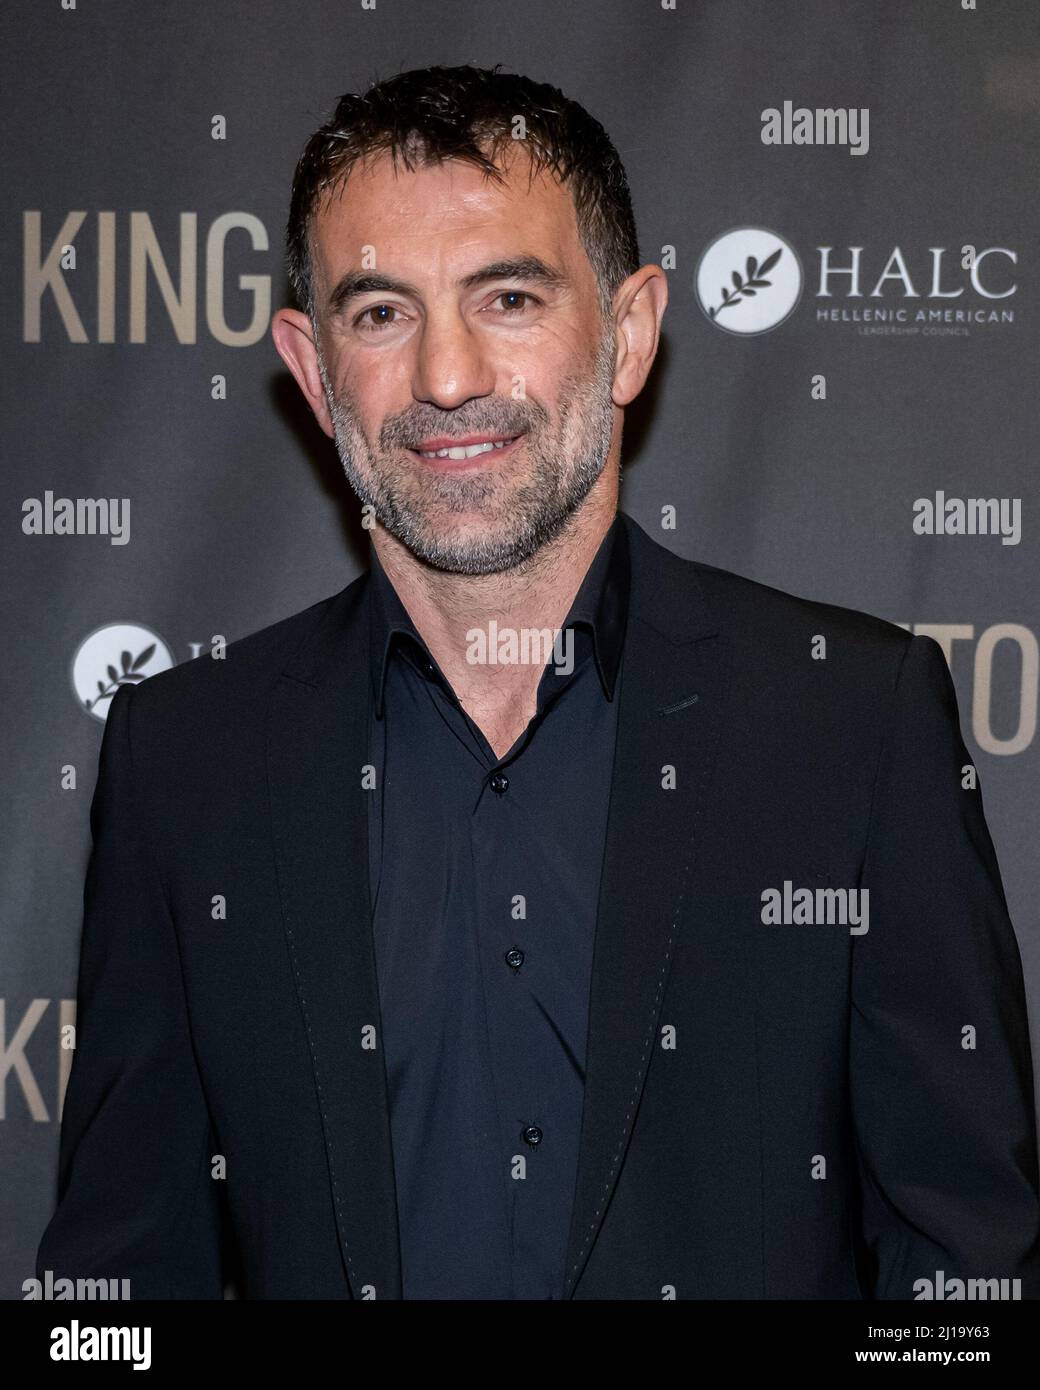 New York, USA. 23rd Mar, 2022. Georgios Karagounis attends the premiere of “King Otto” at the Museum of Modern Art in New York, New York, on Mar. 23, 2022. (Photo by Gabriele Holtermann/Sipa USA) Credit: Sipa USA/Alamy Live News Stock Photo